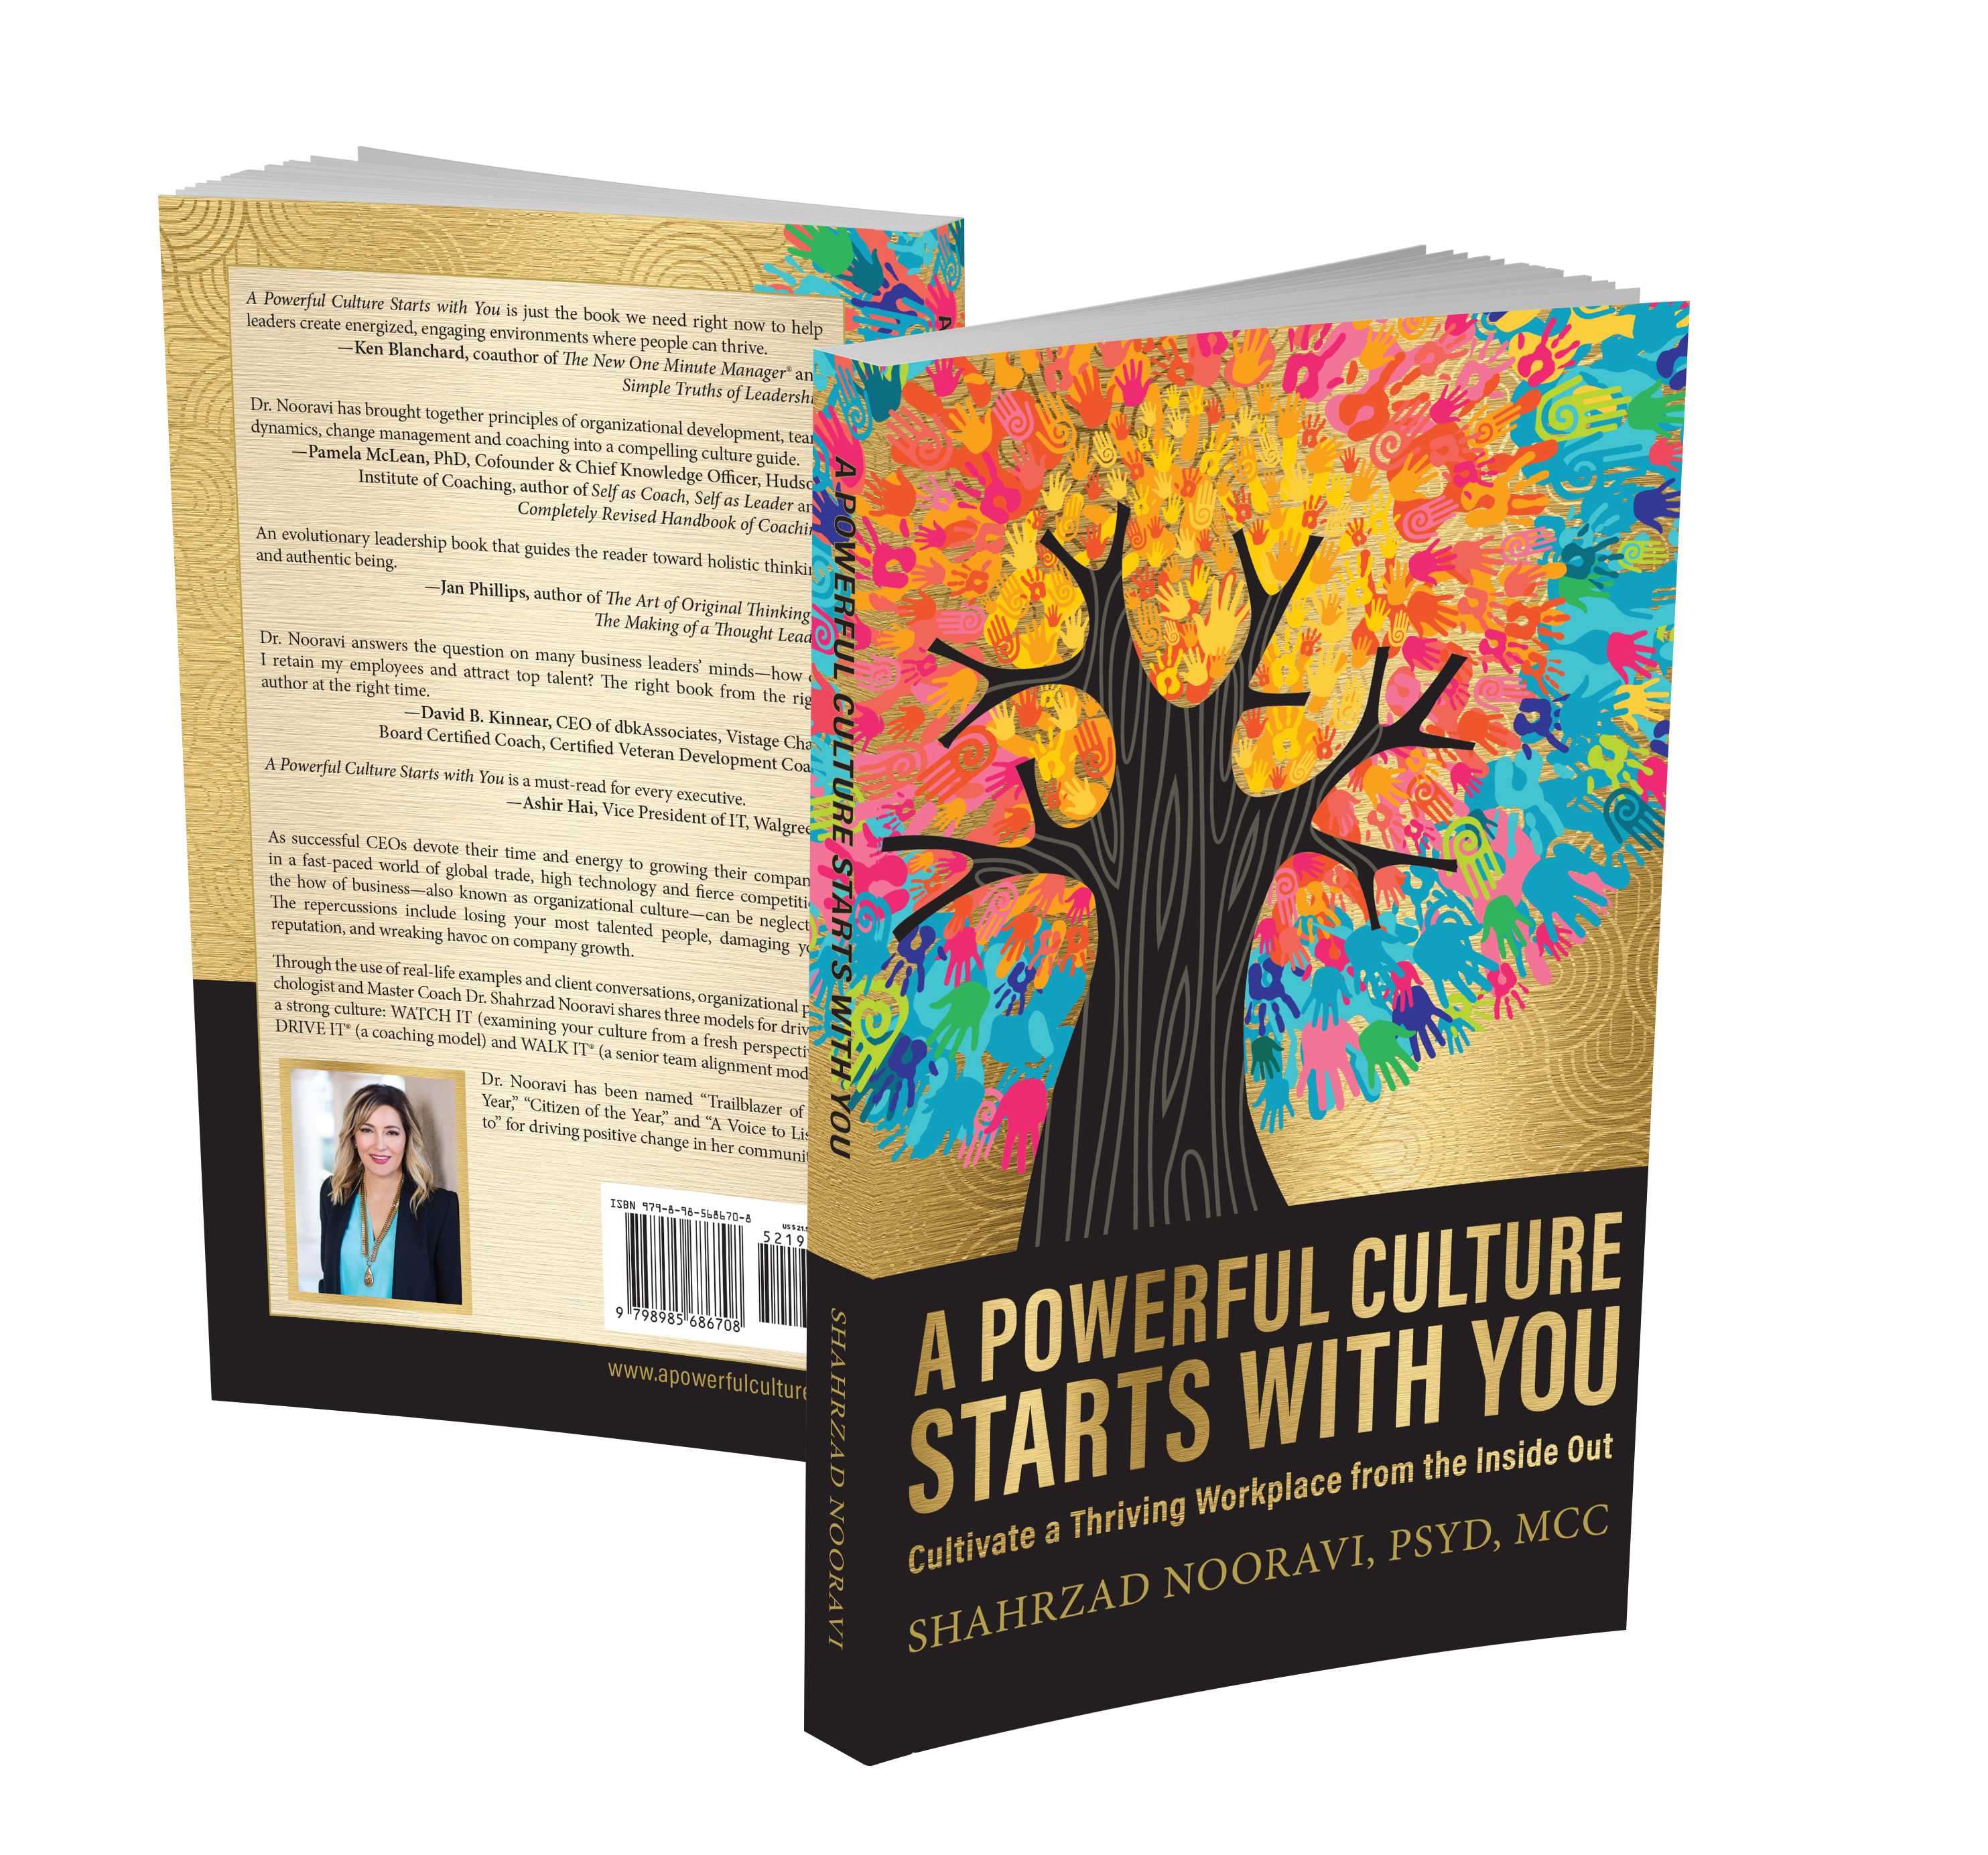 A Powerful Culture Starts with Book Book Image - Tree with colorful handprints as leaves. Gold background.